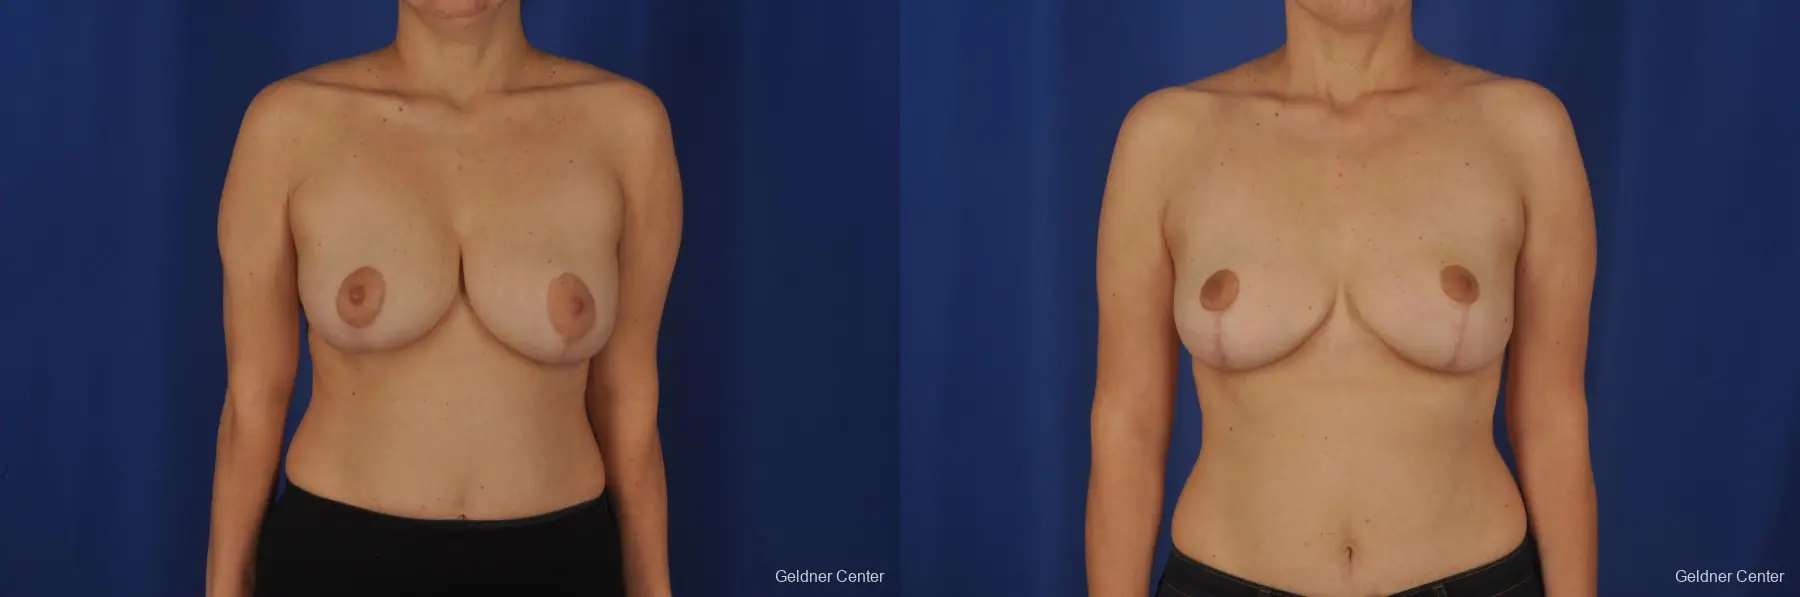 Chicago Breast Reduction 2068 - Before and After 1